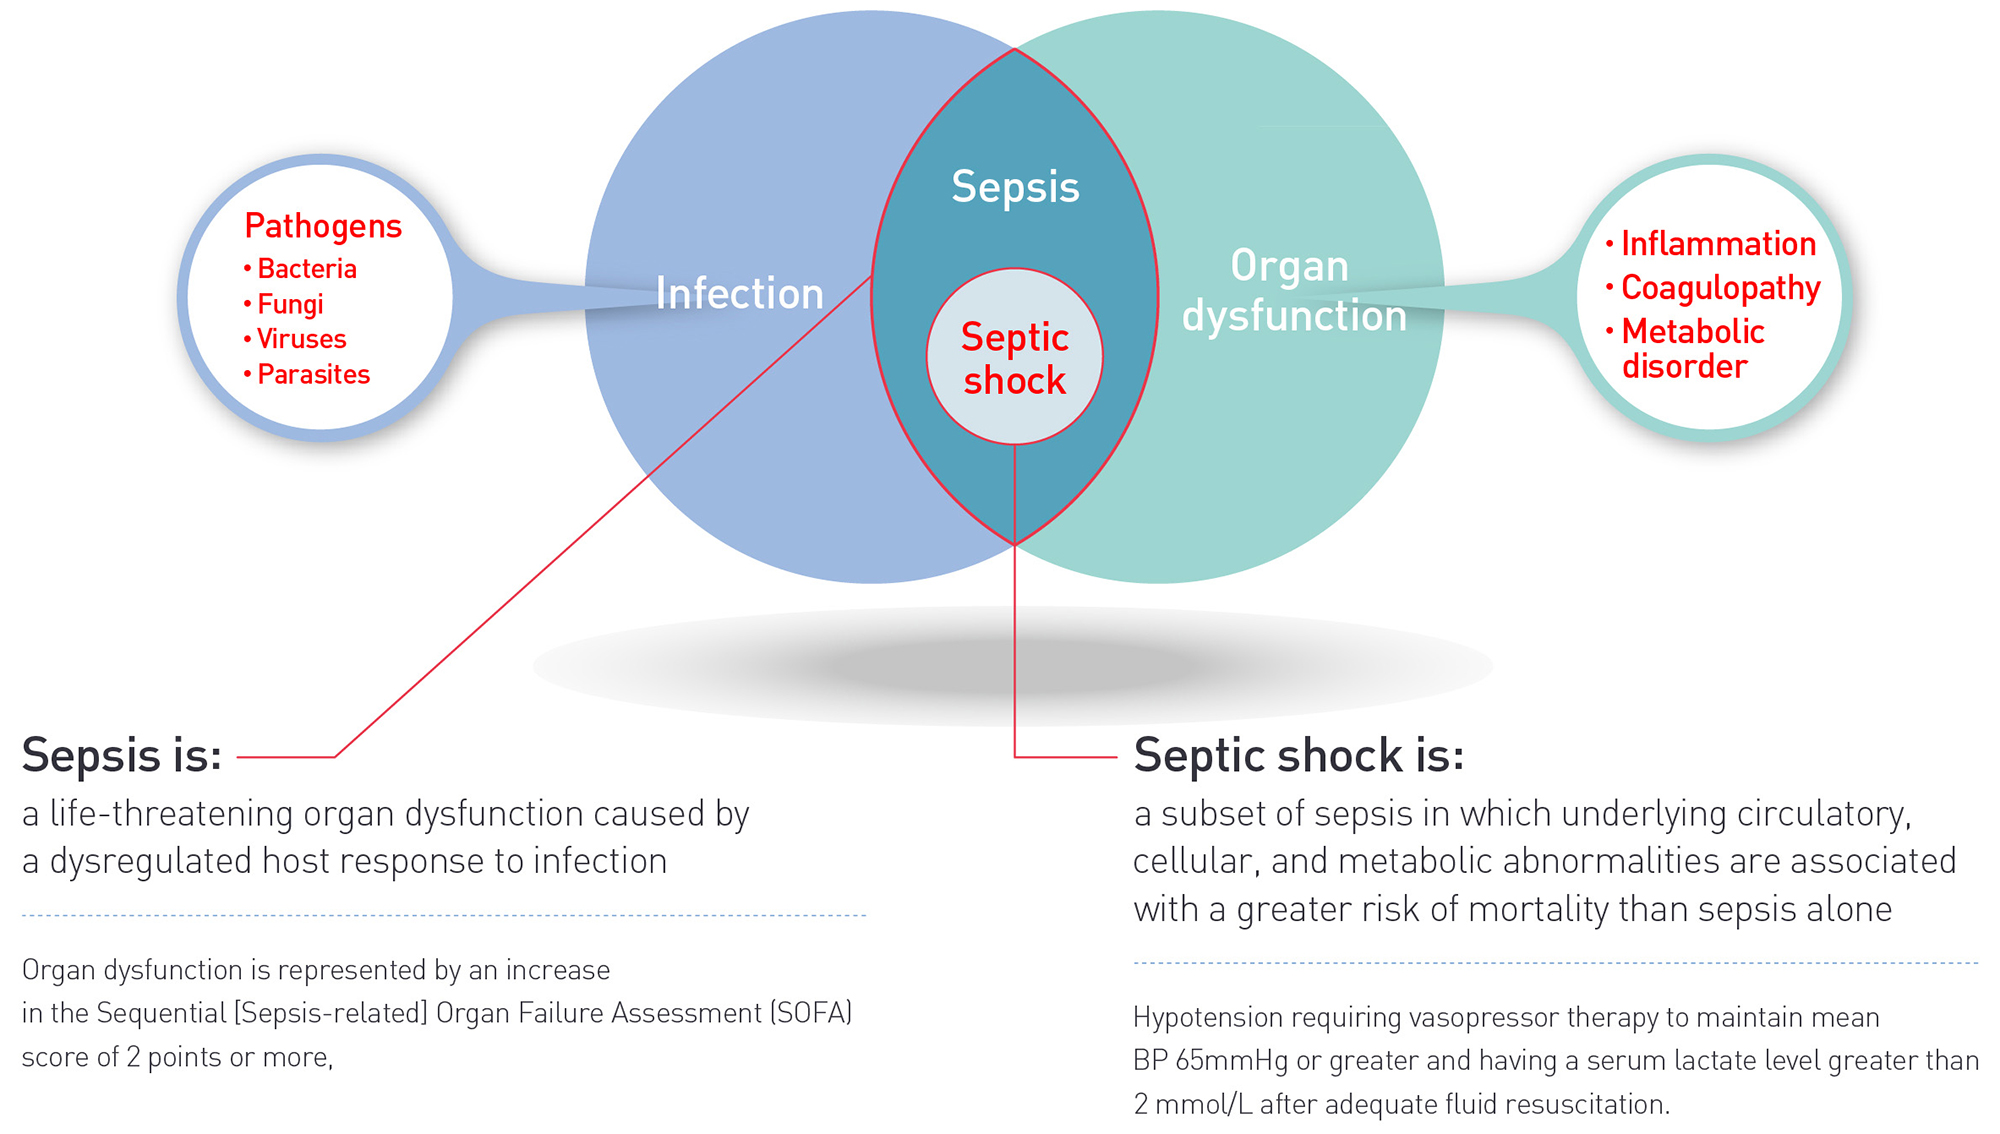 Definitions of sepsis and septic shock